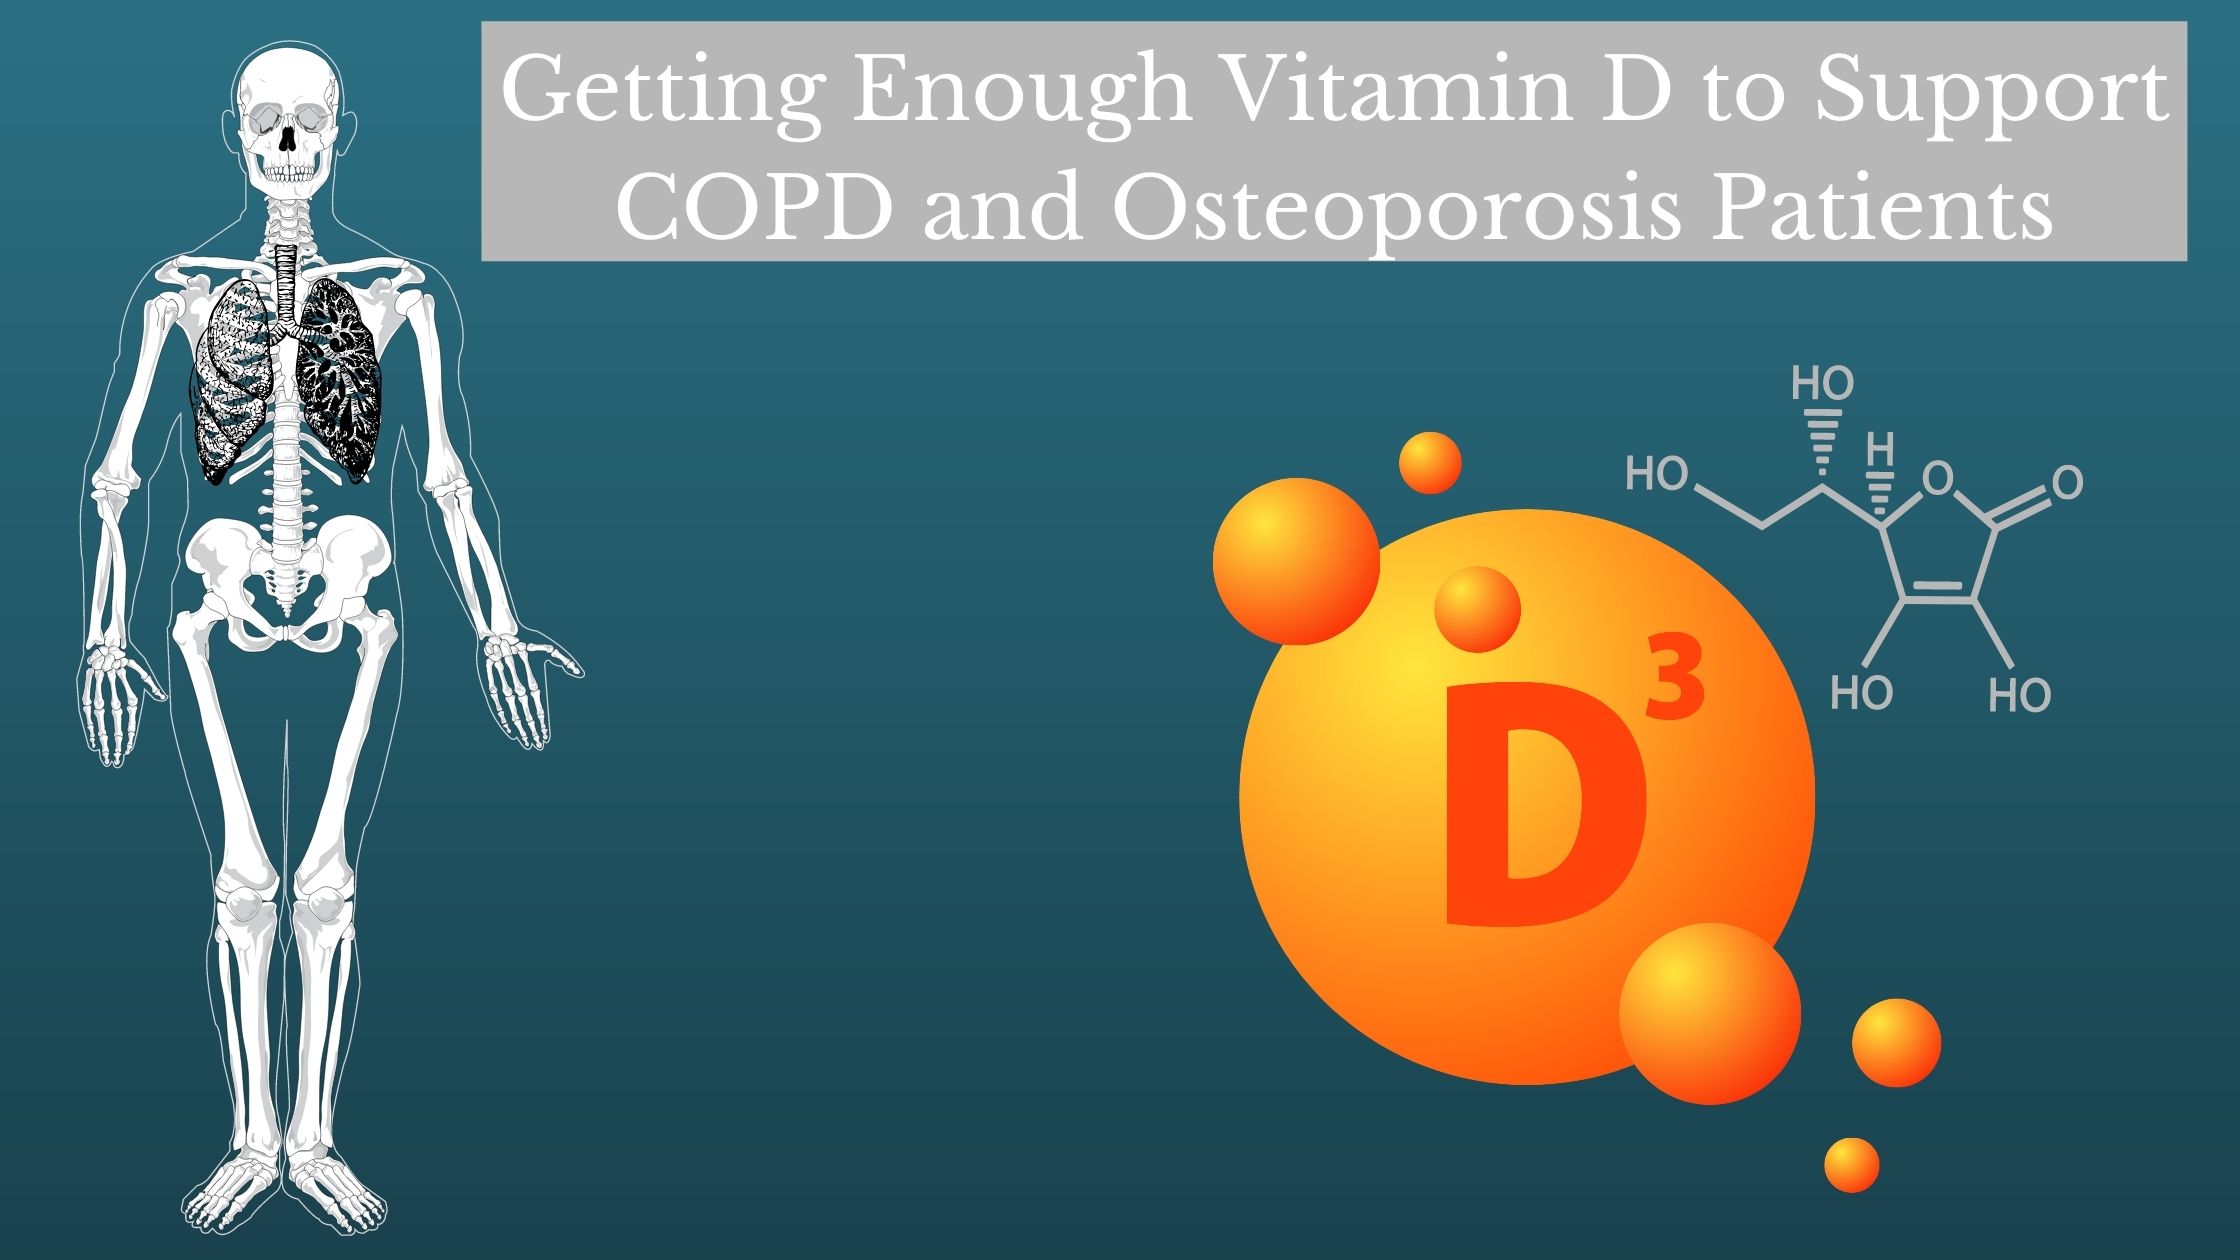 Getting Enough Vitamin D to Support COPD and Osteoporosis Patients